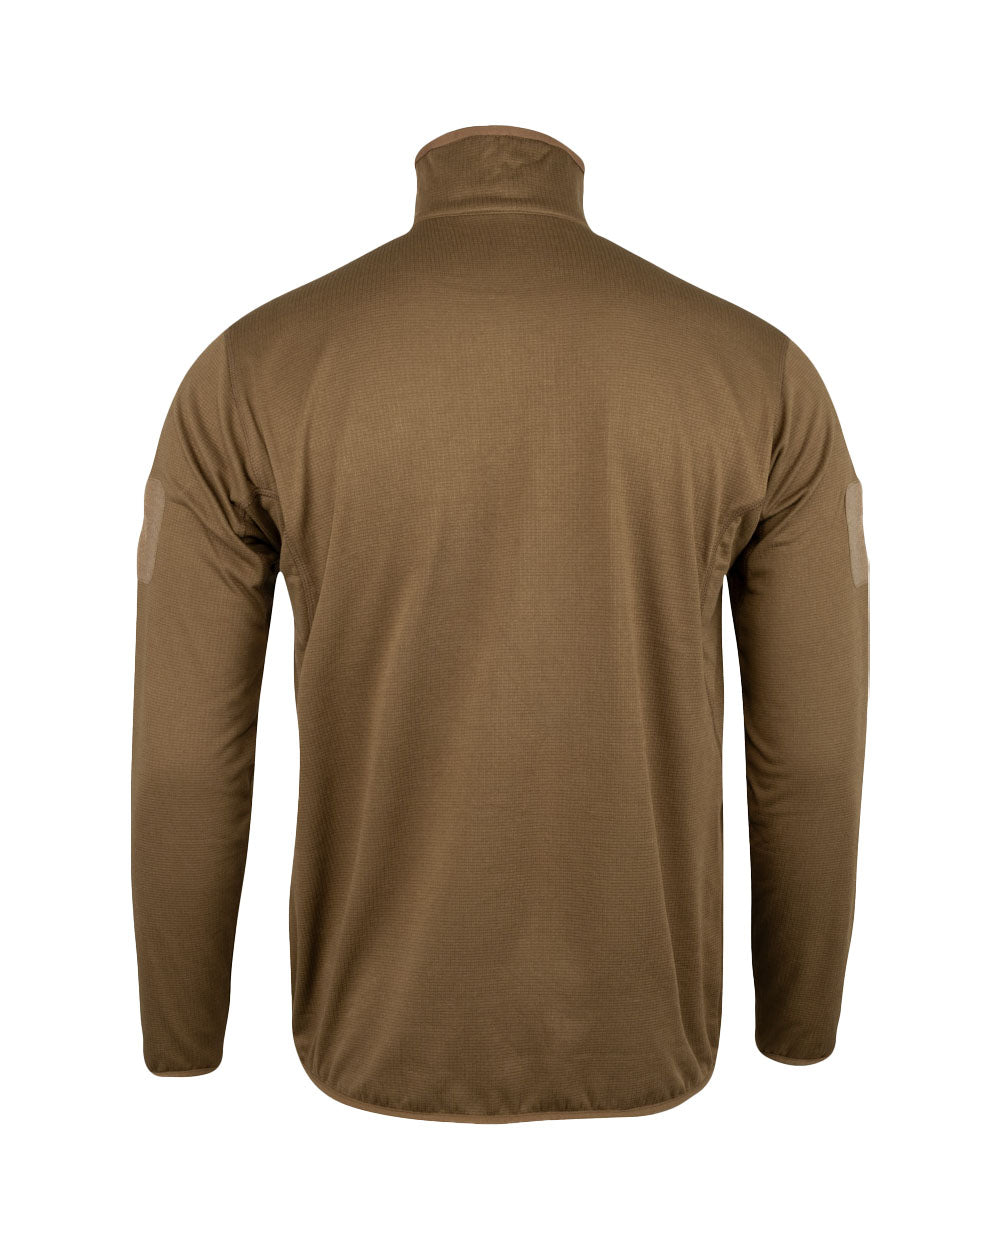 Coyote coloured Viper Tech Mid Layer Fleece Top on White background 